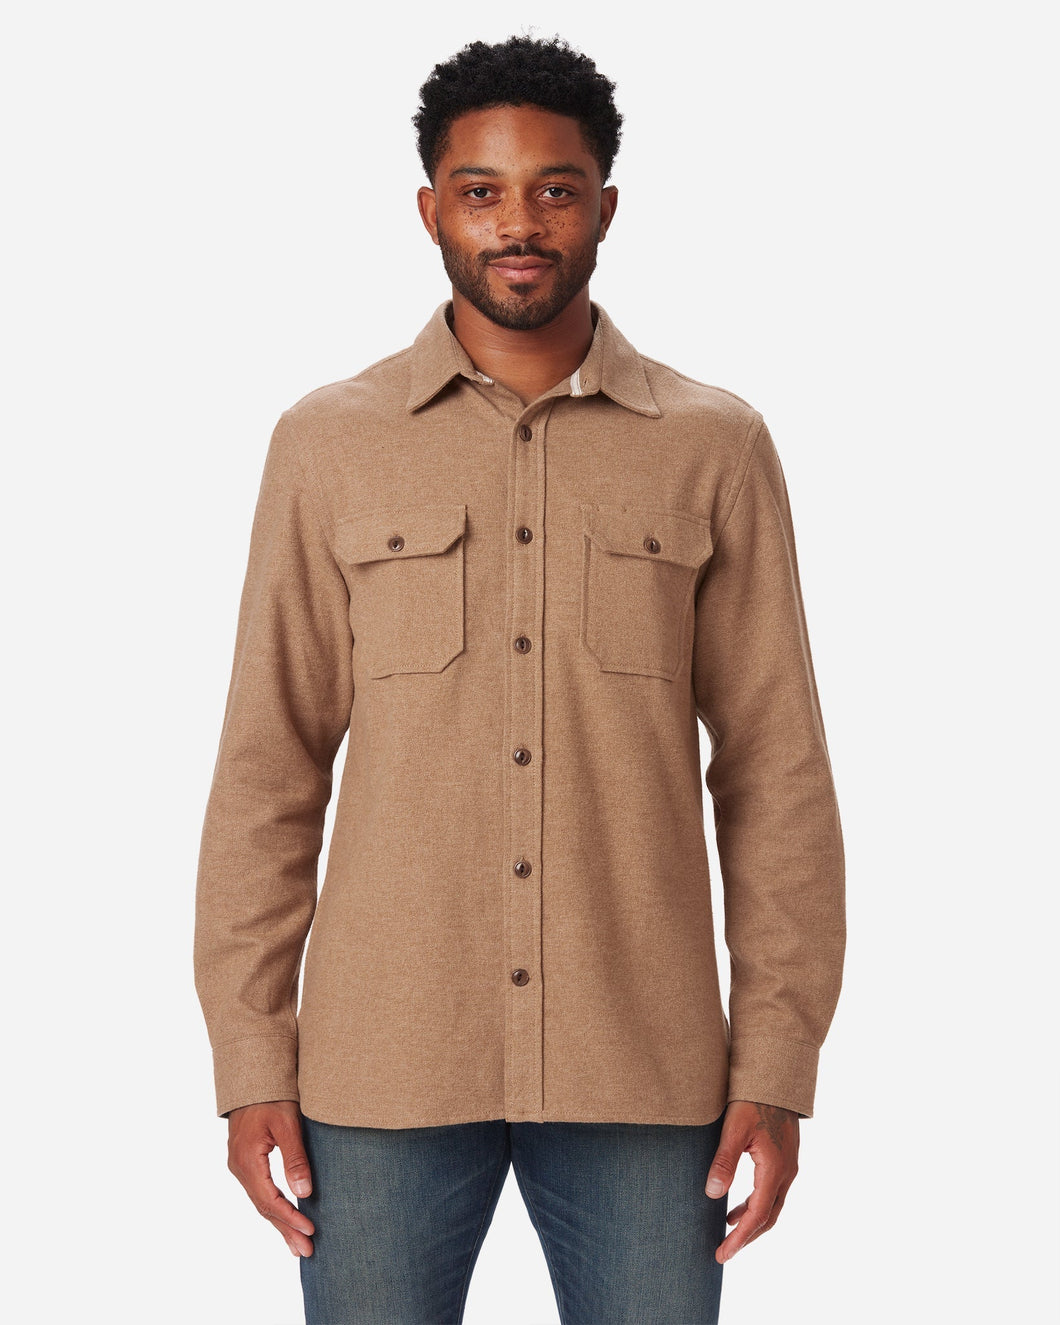 Flannel Utility Shirt in Camel